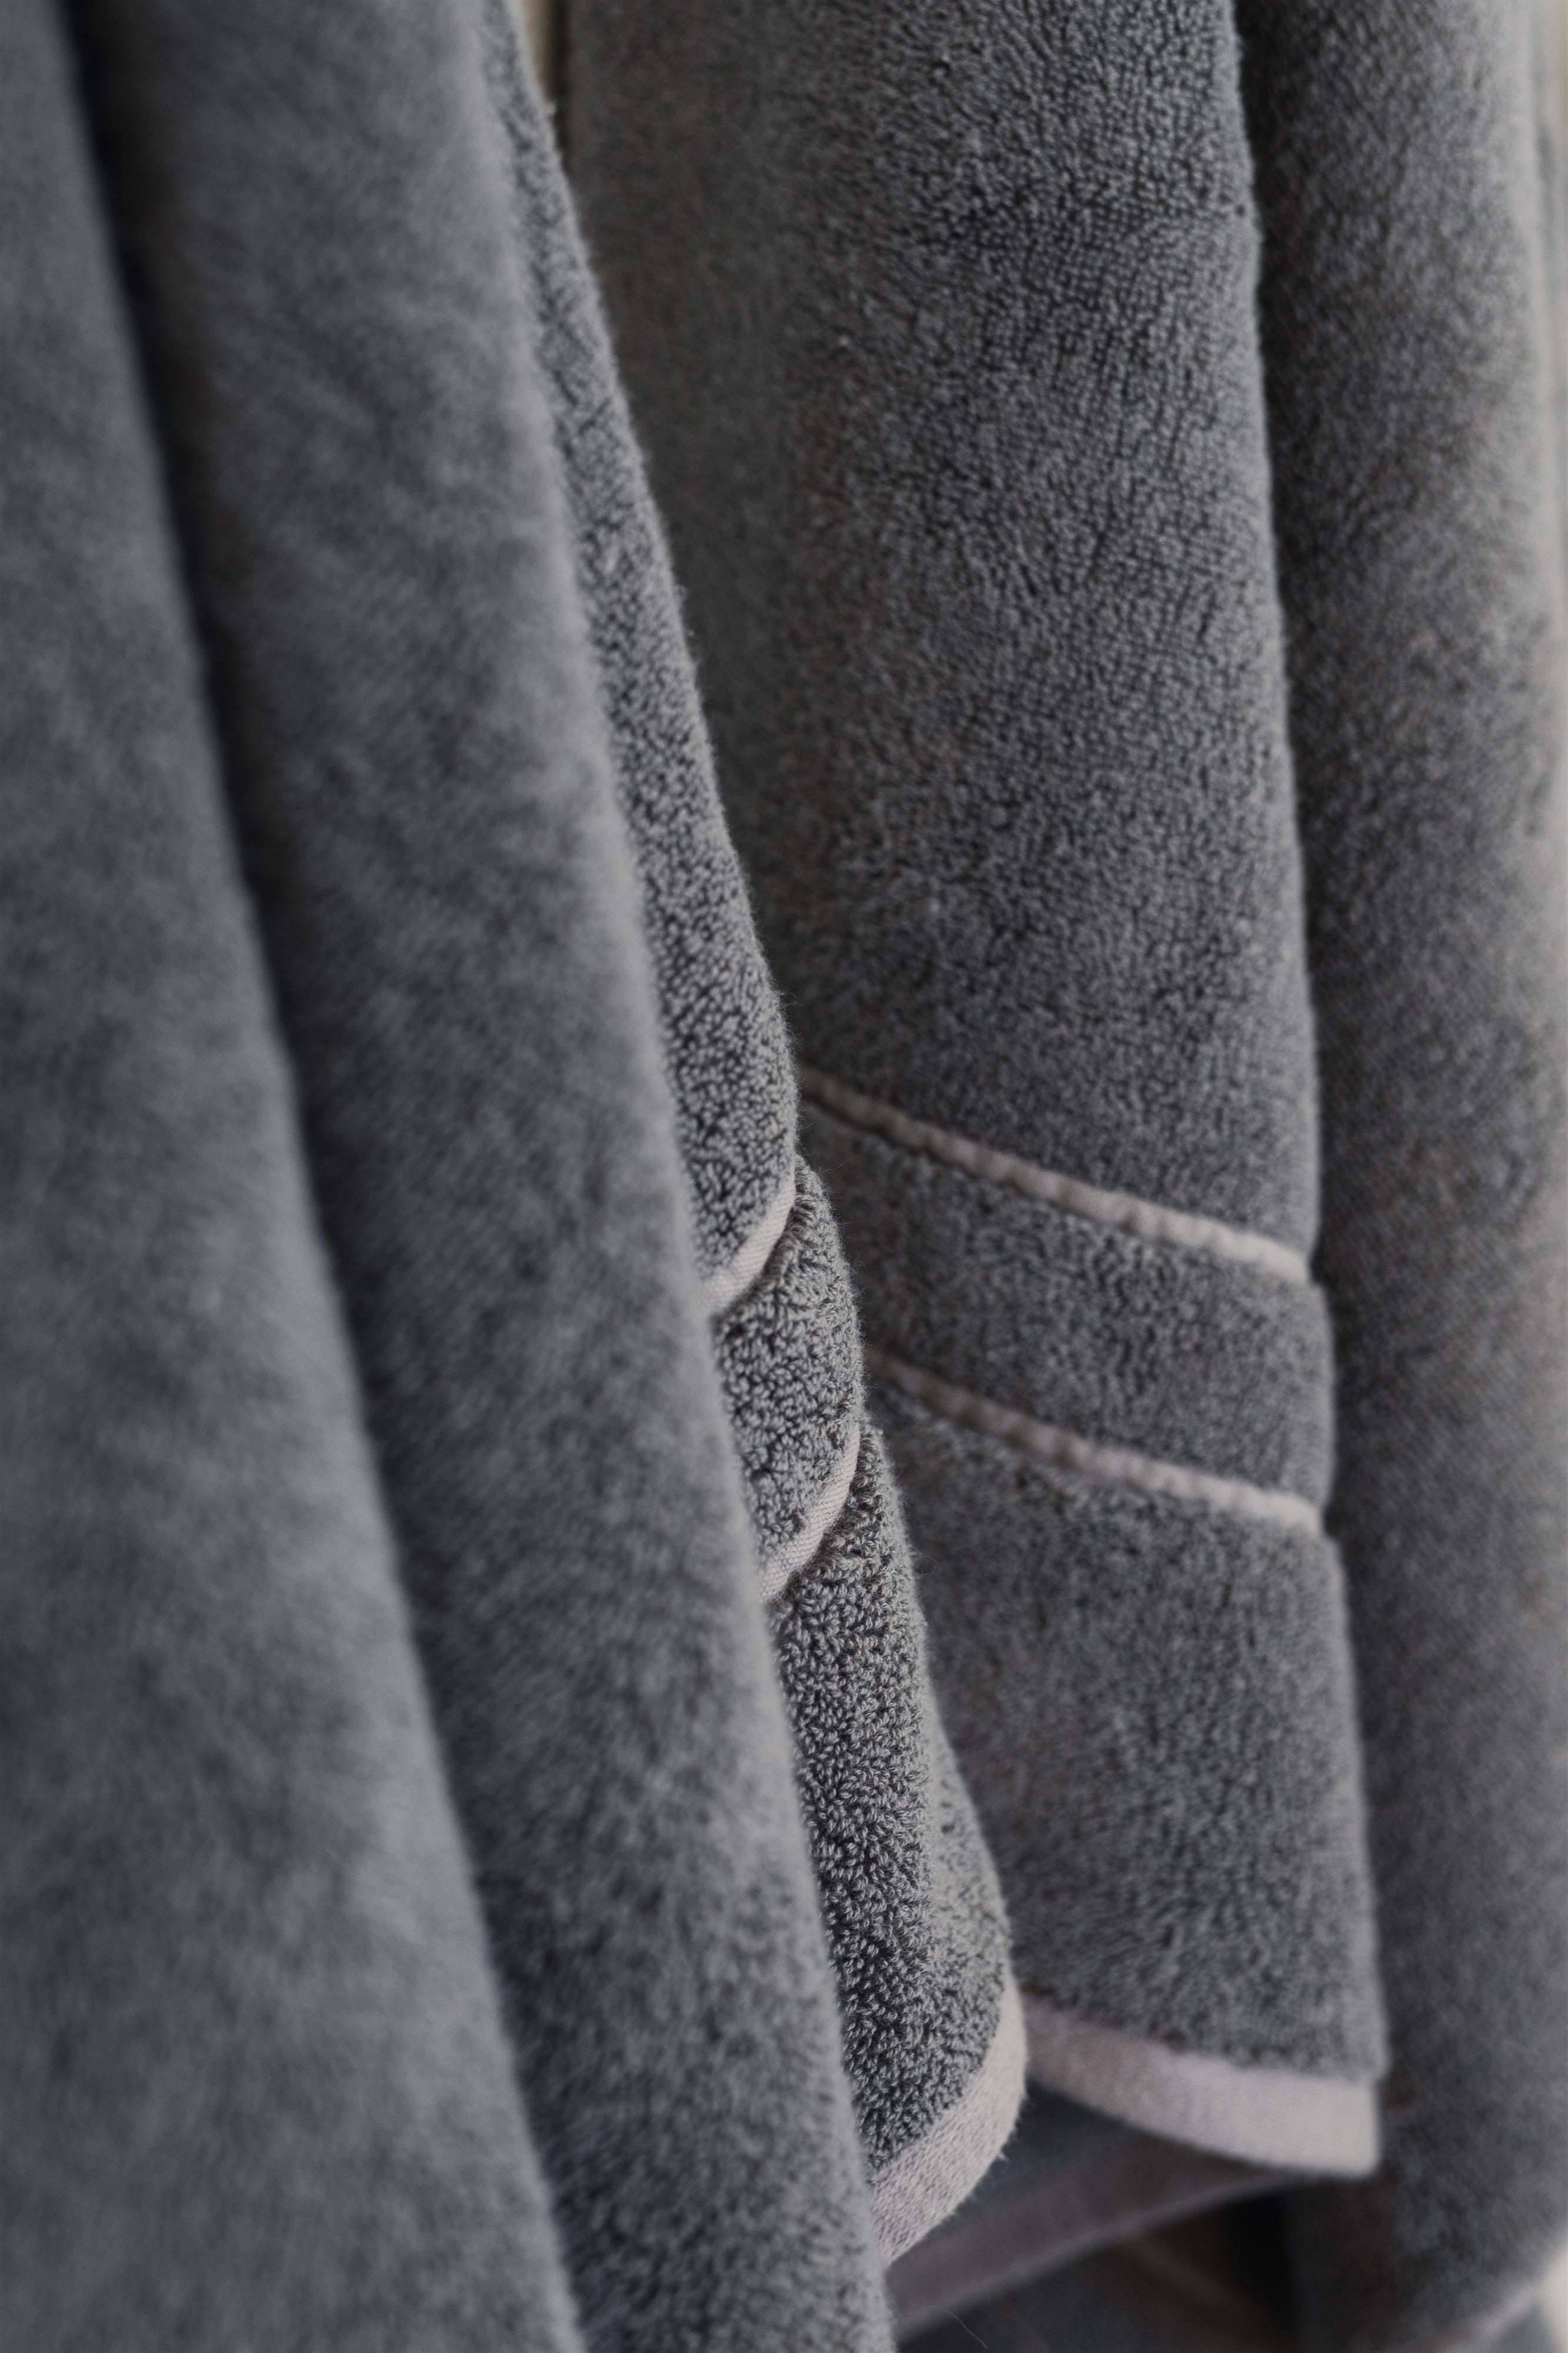 Premium Plush Bath Sheet in the color Charcoal. Photo of Charcoal Premium Plush Bath Sheet taken as a close up of the Premium Plush Bath Sheet. |Color:Charcoal